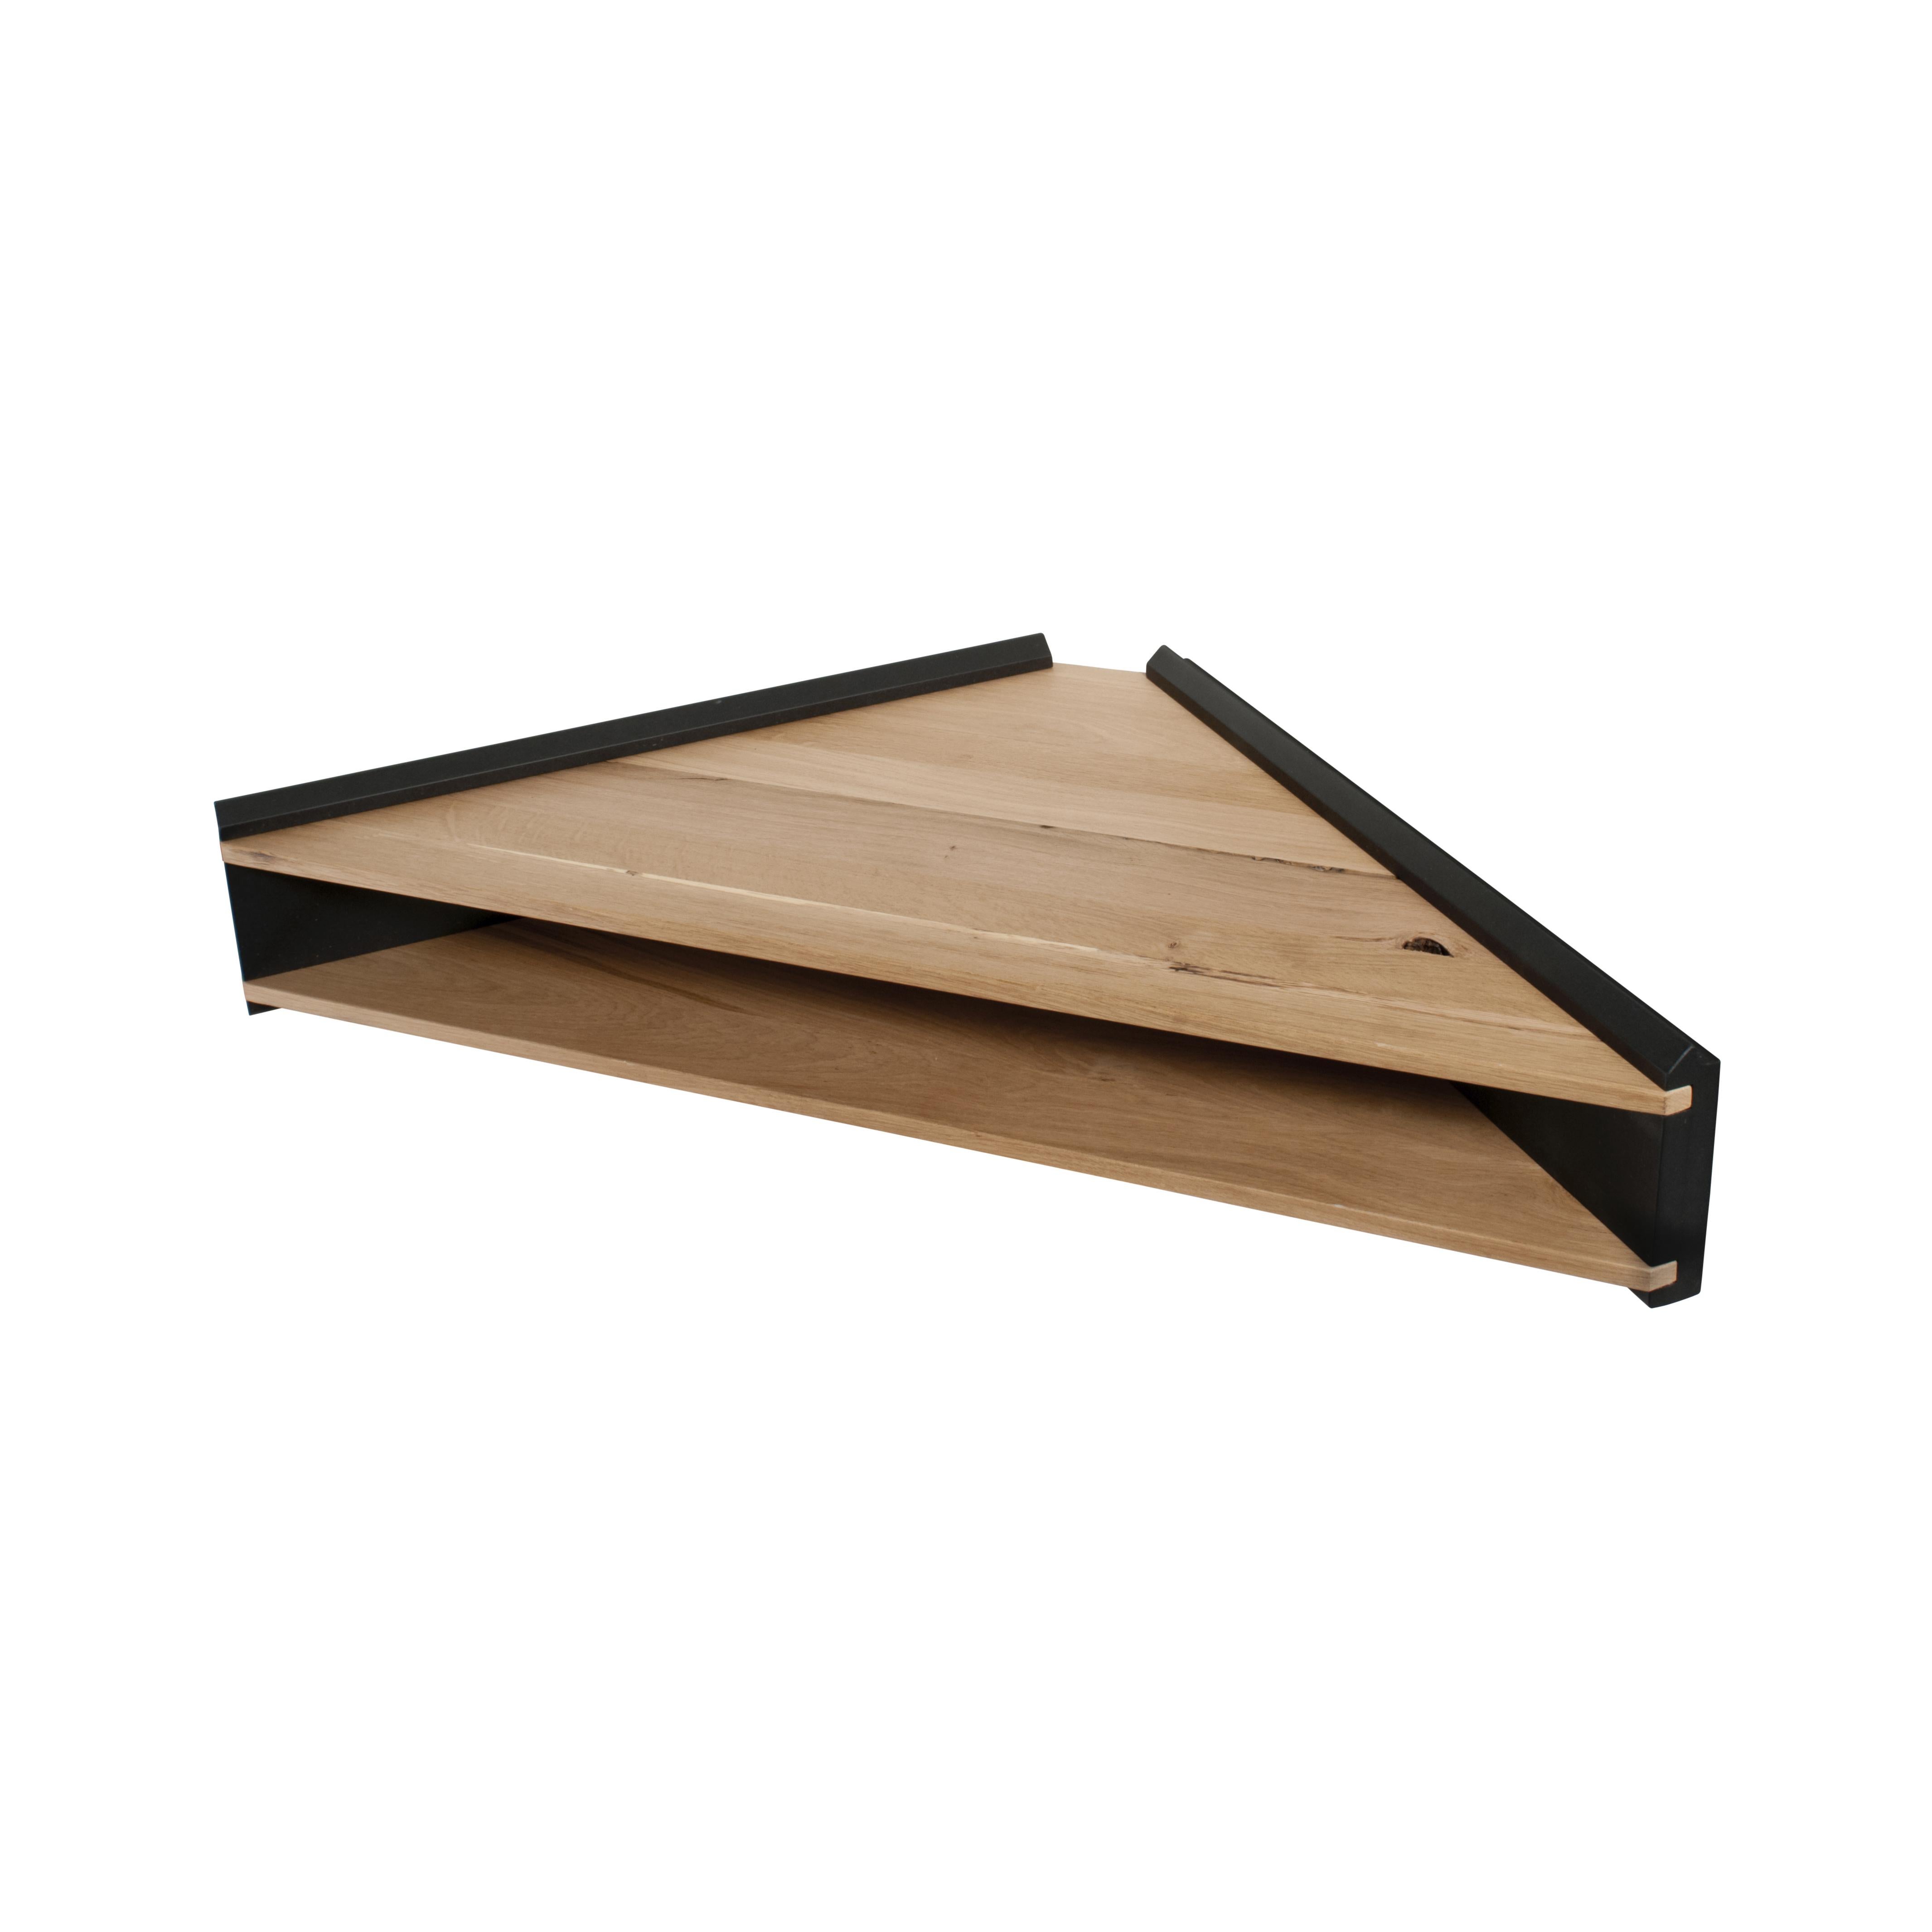 Black Briccola-ge Shelf by Colé Italia with Miki Astori
Dimensions: H.25; D.47 W.100
Materials: wall angular hanged writing desk; wall lacquered supports in wood pulp. 2 solid oak shelves with antique style wood inserts 

Also available: Red,